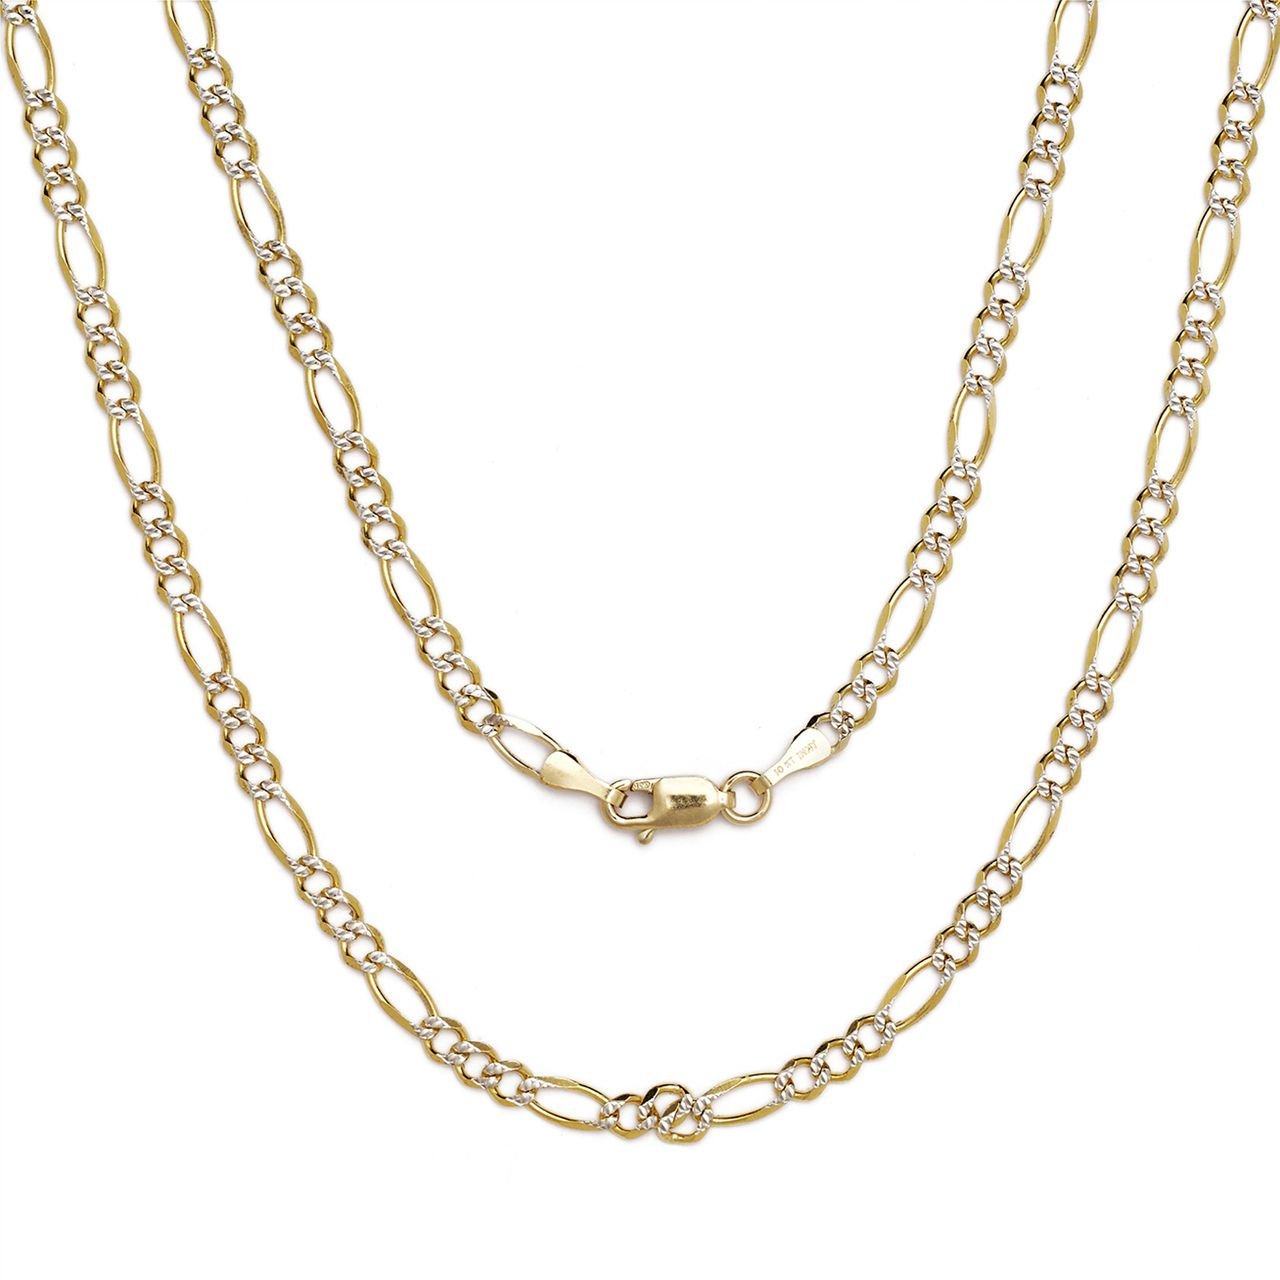 10k Two-Tone Gold Figaro Chain Necklace with White Pave,  0.19 Inch (4.7mm)